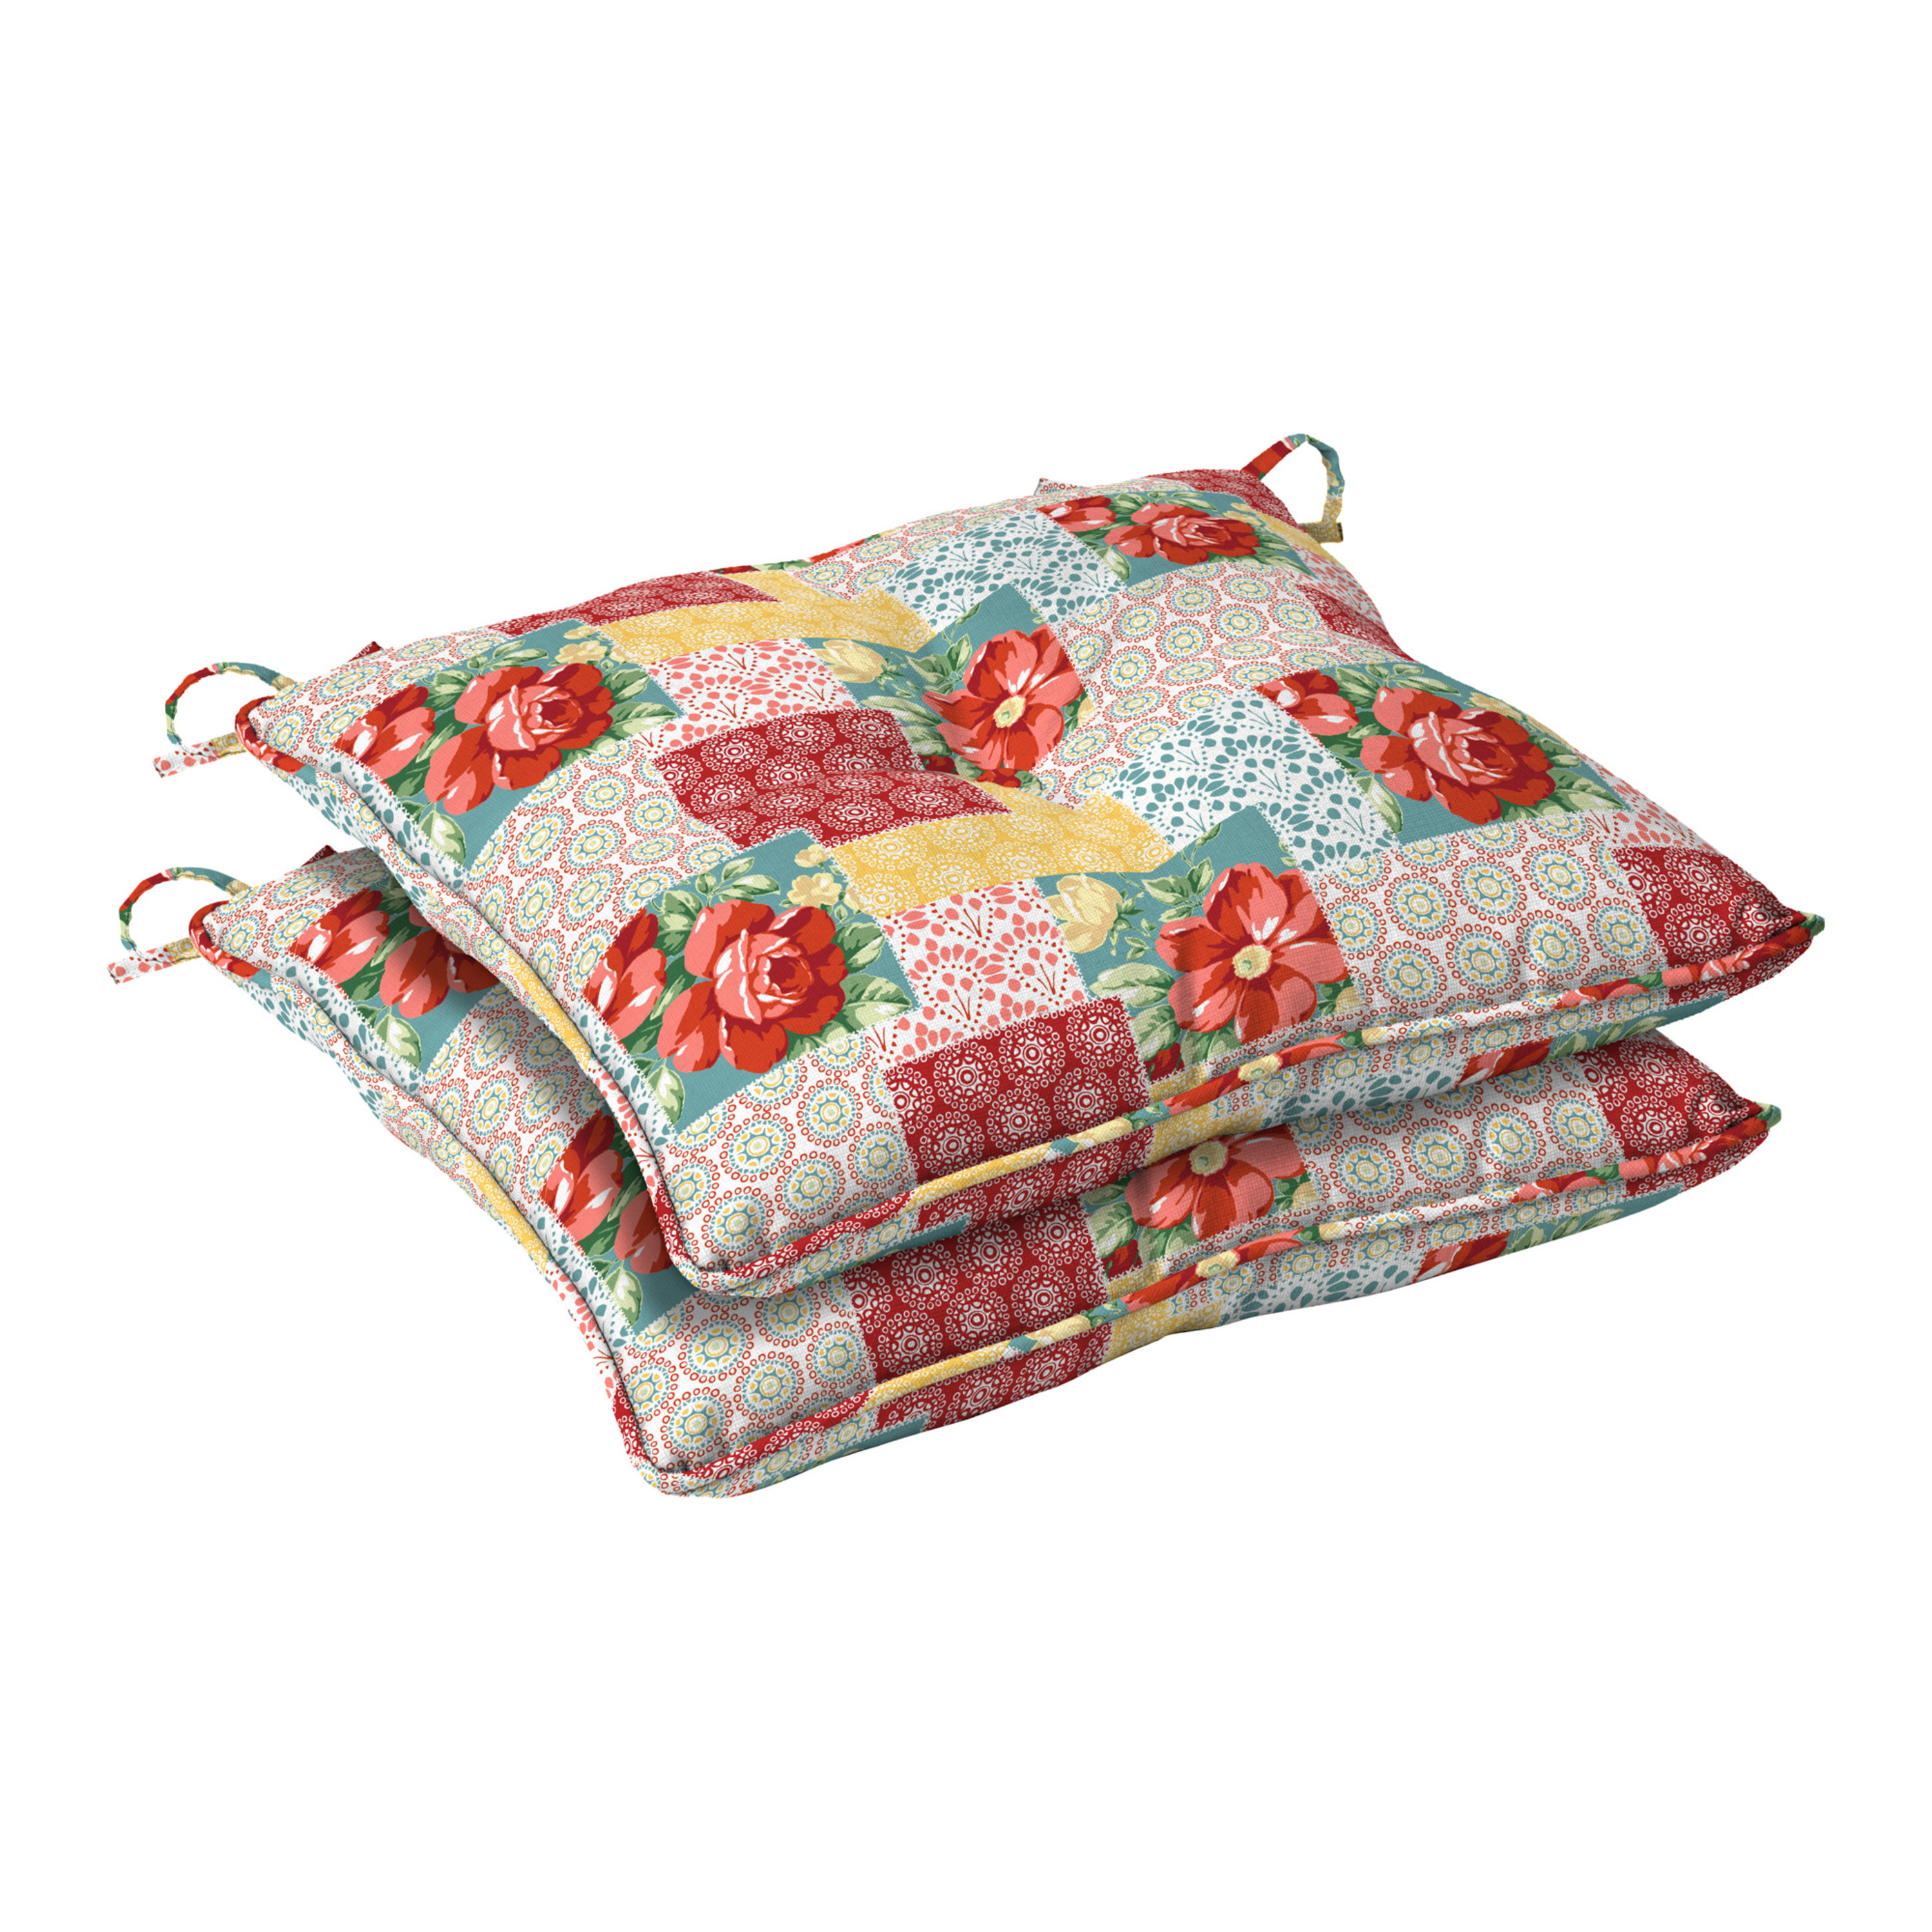 The Pioneer Woman 18" x 19" Multi-color Floral Patchwork Outdoor Seat Pad, 2 Pack - image 1 of 8